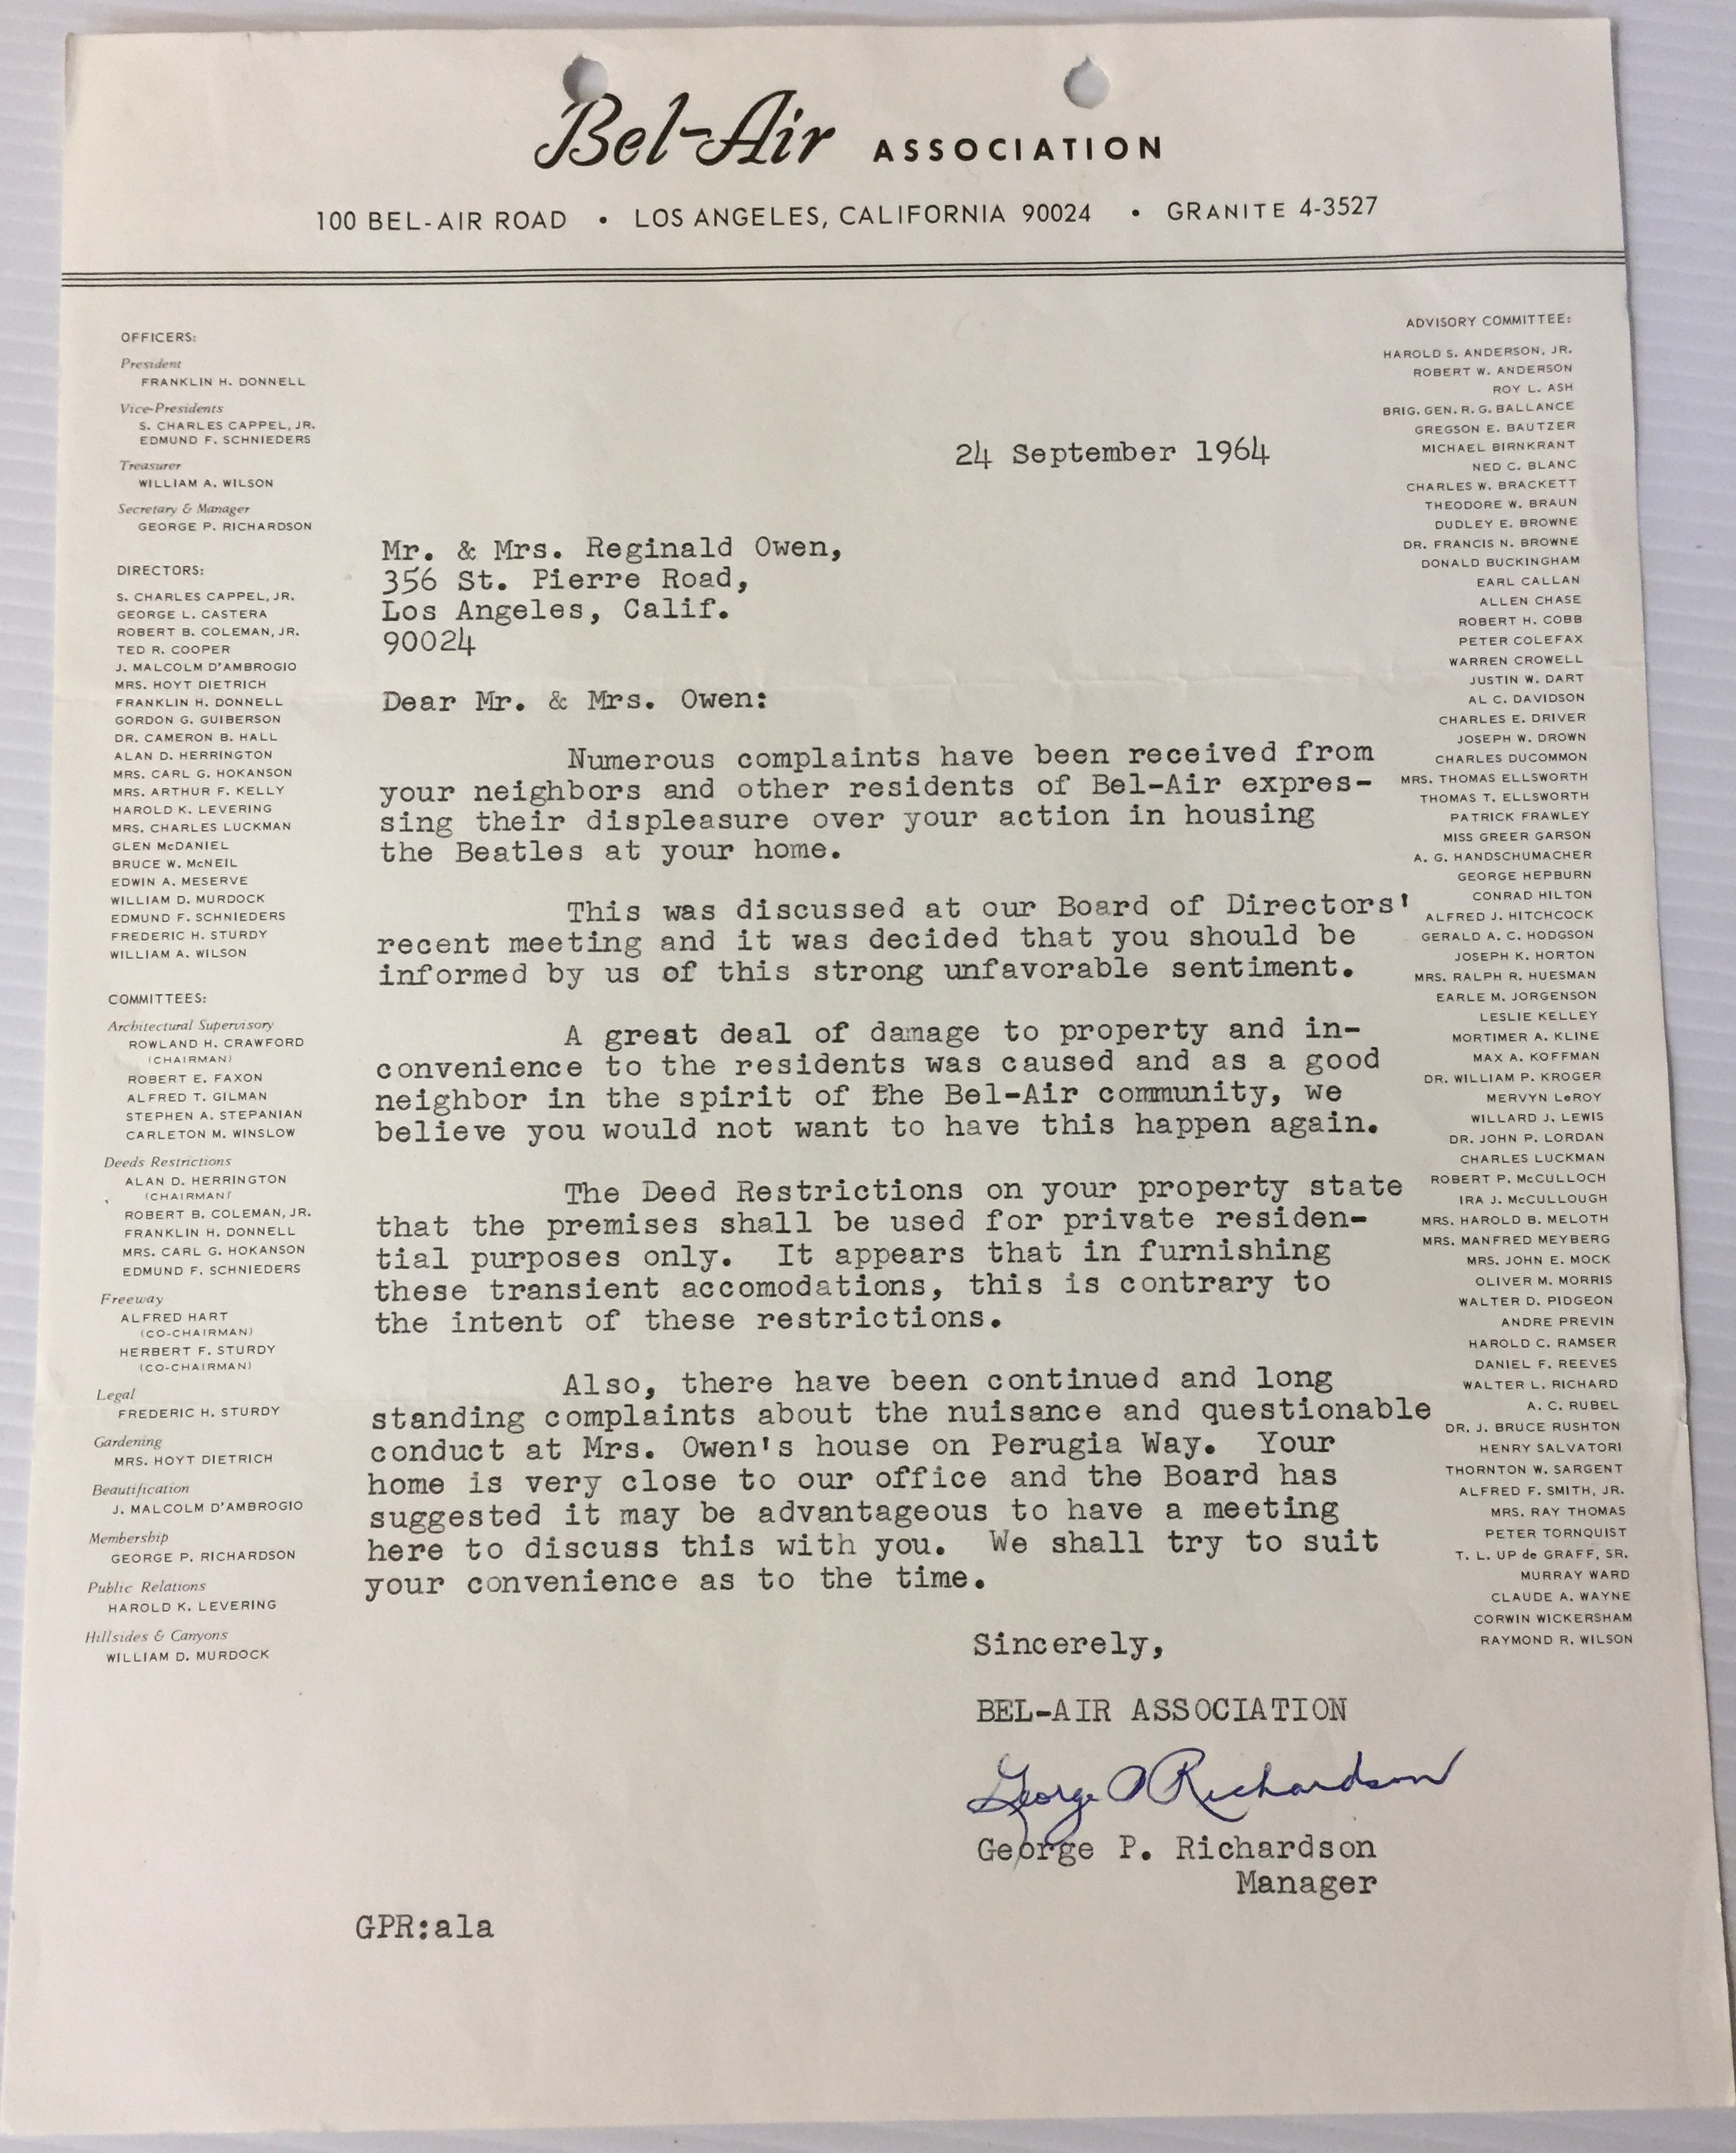 BEATLES LETTER OF COMPLAINT - original hand signed letter written from the "Bel-Air Association" to